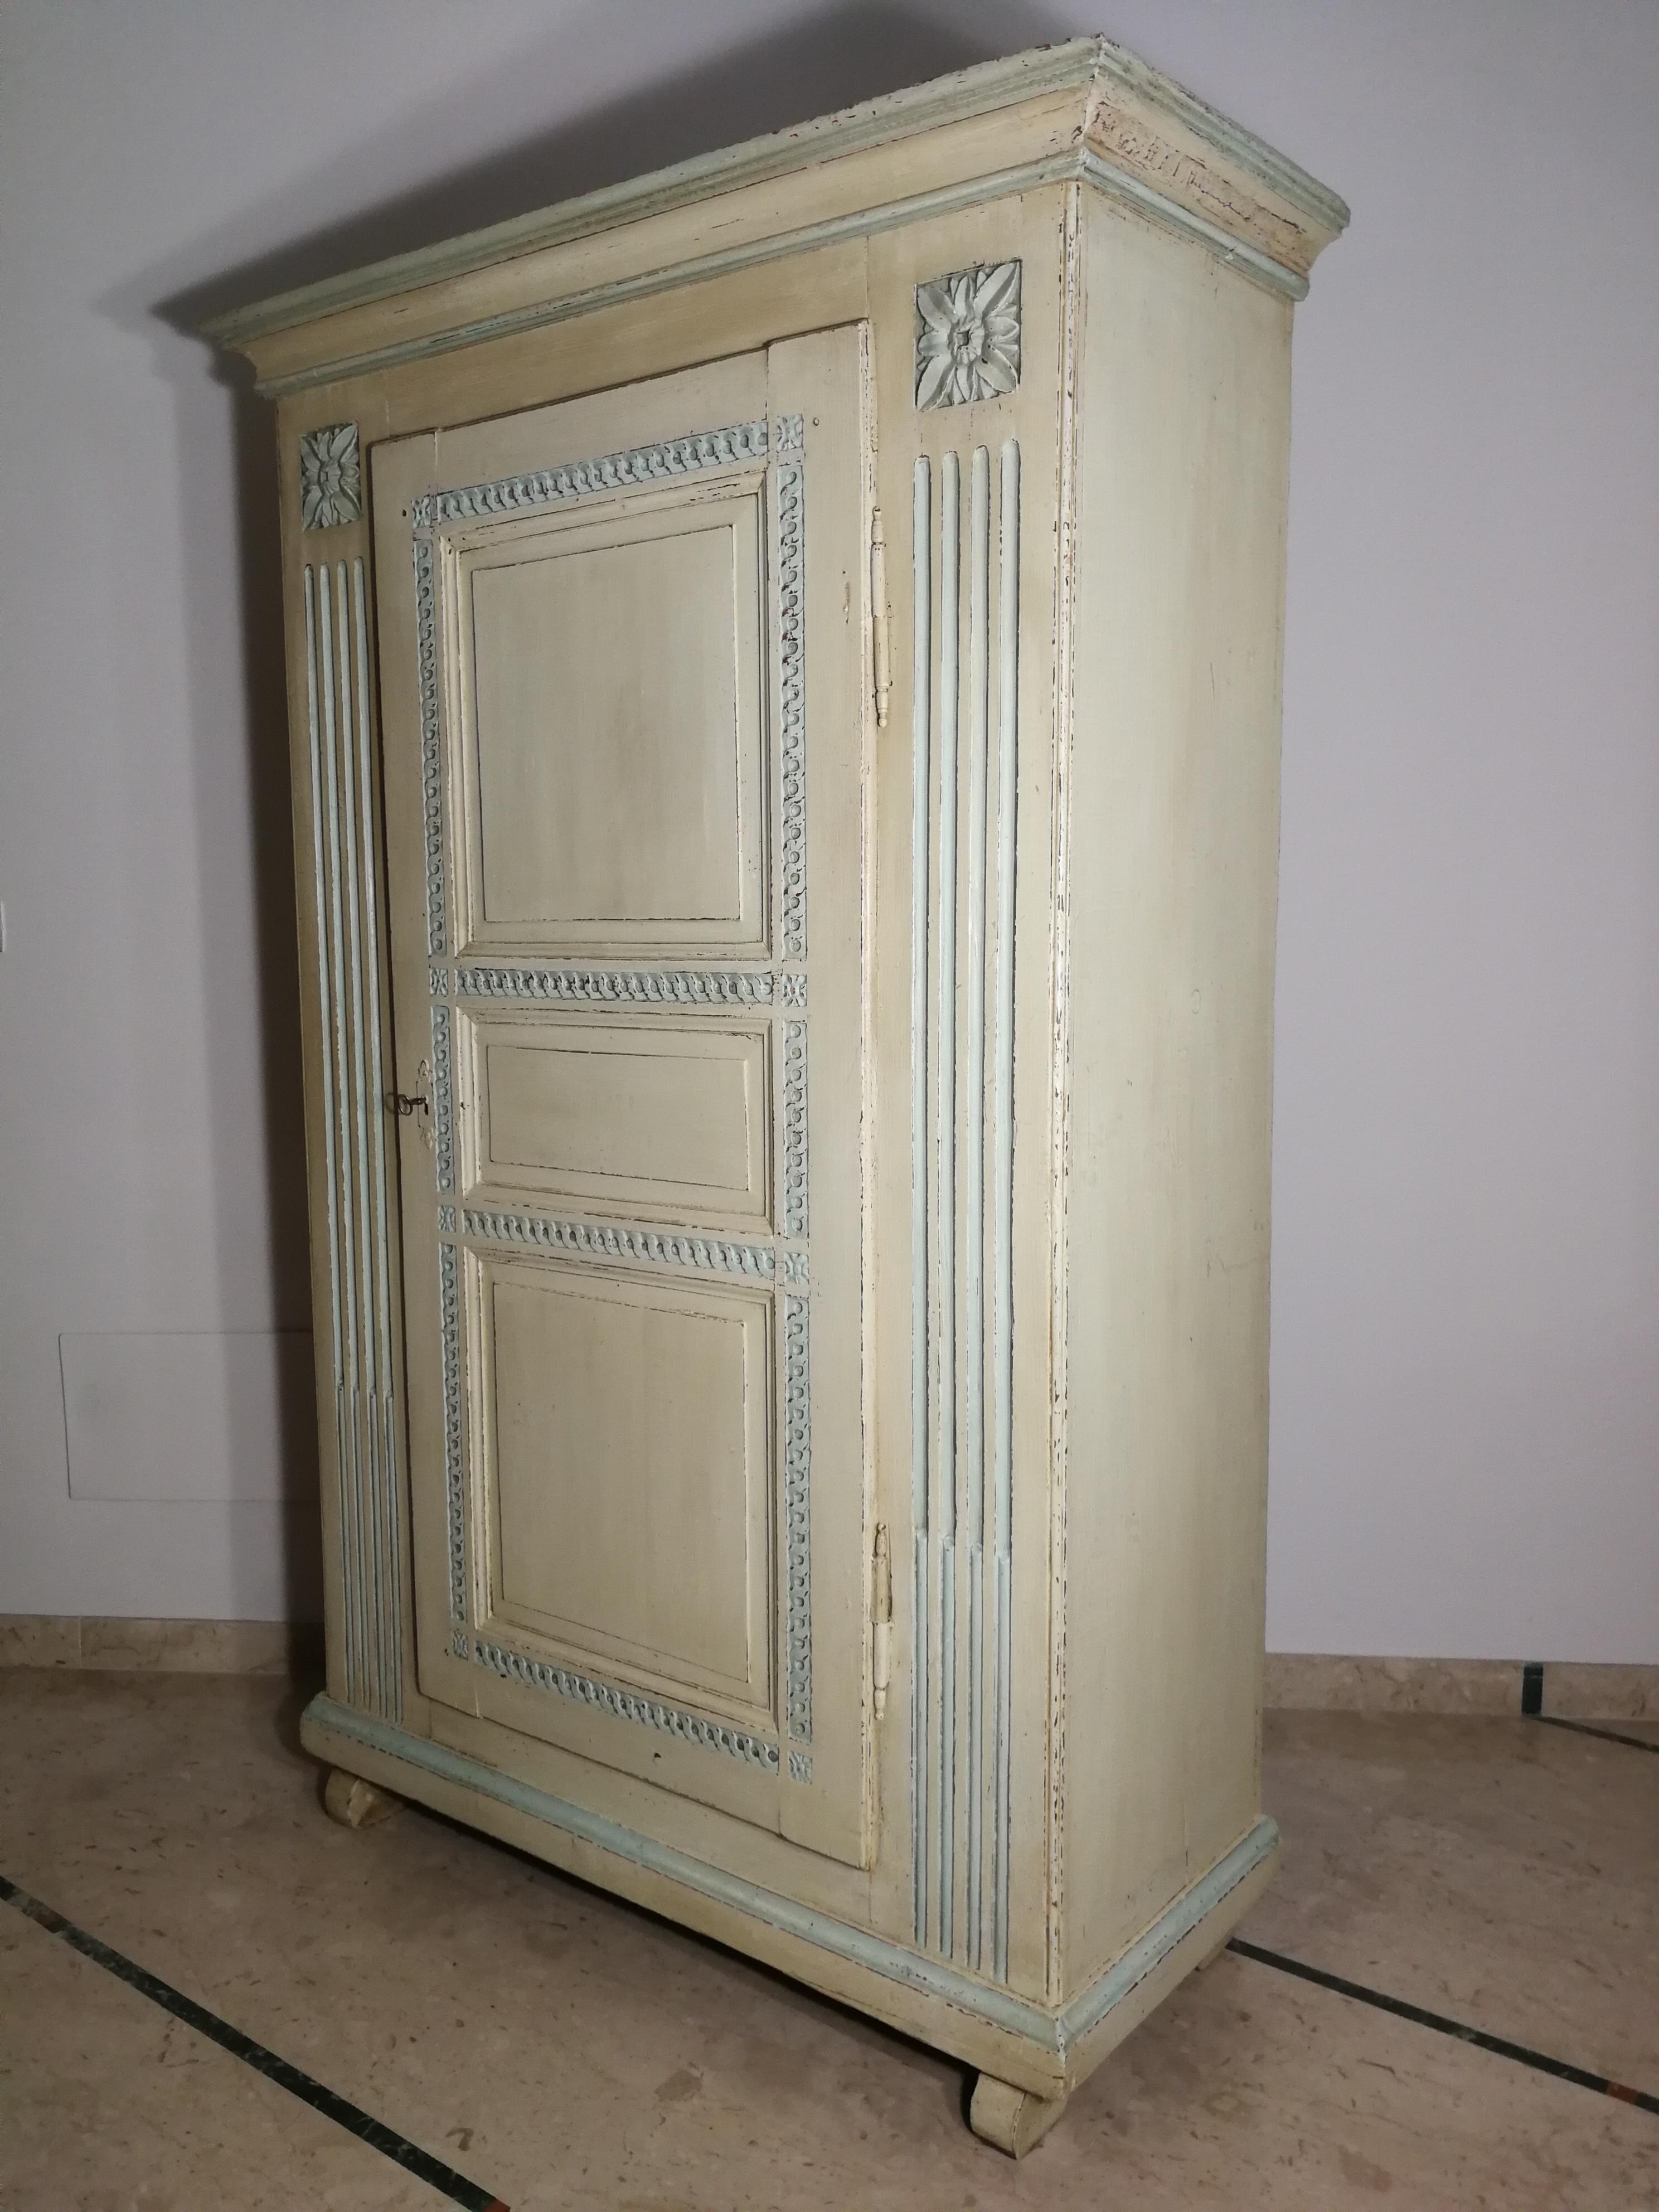 Wardrobe from the late 1700s painted with pastel colors.
It is composed of a single wing-shaped block with three molded and sculpted panels. The front is enriched with grooves and rosettes
Restored preserving the original paint and polished with